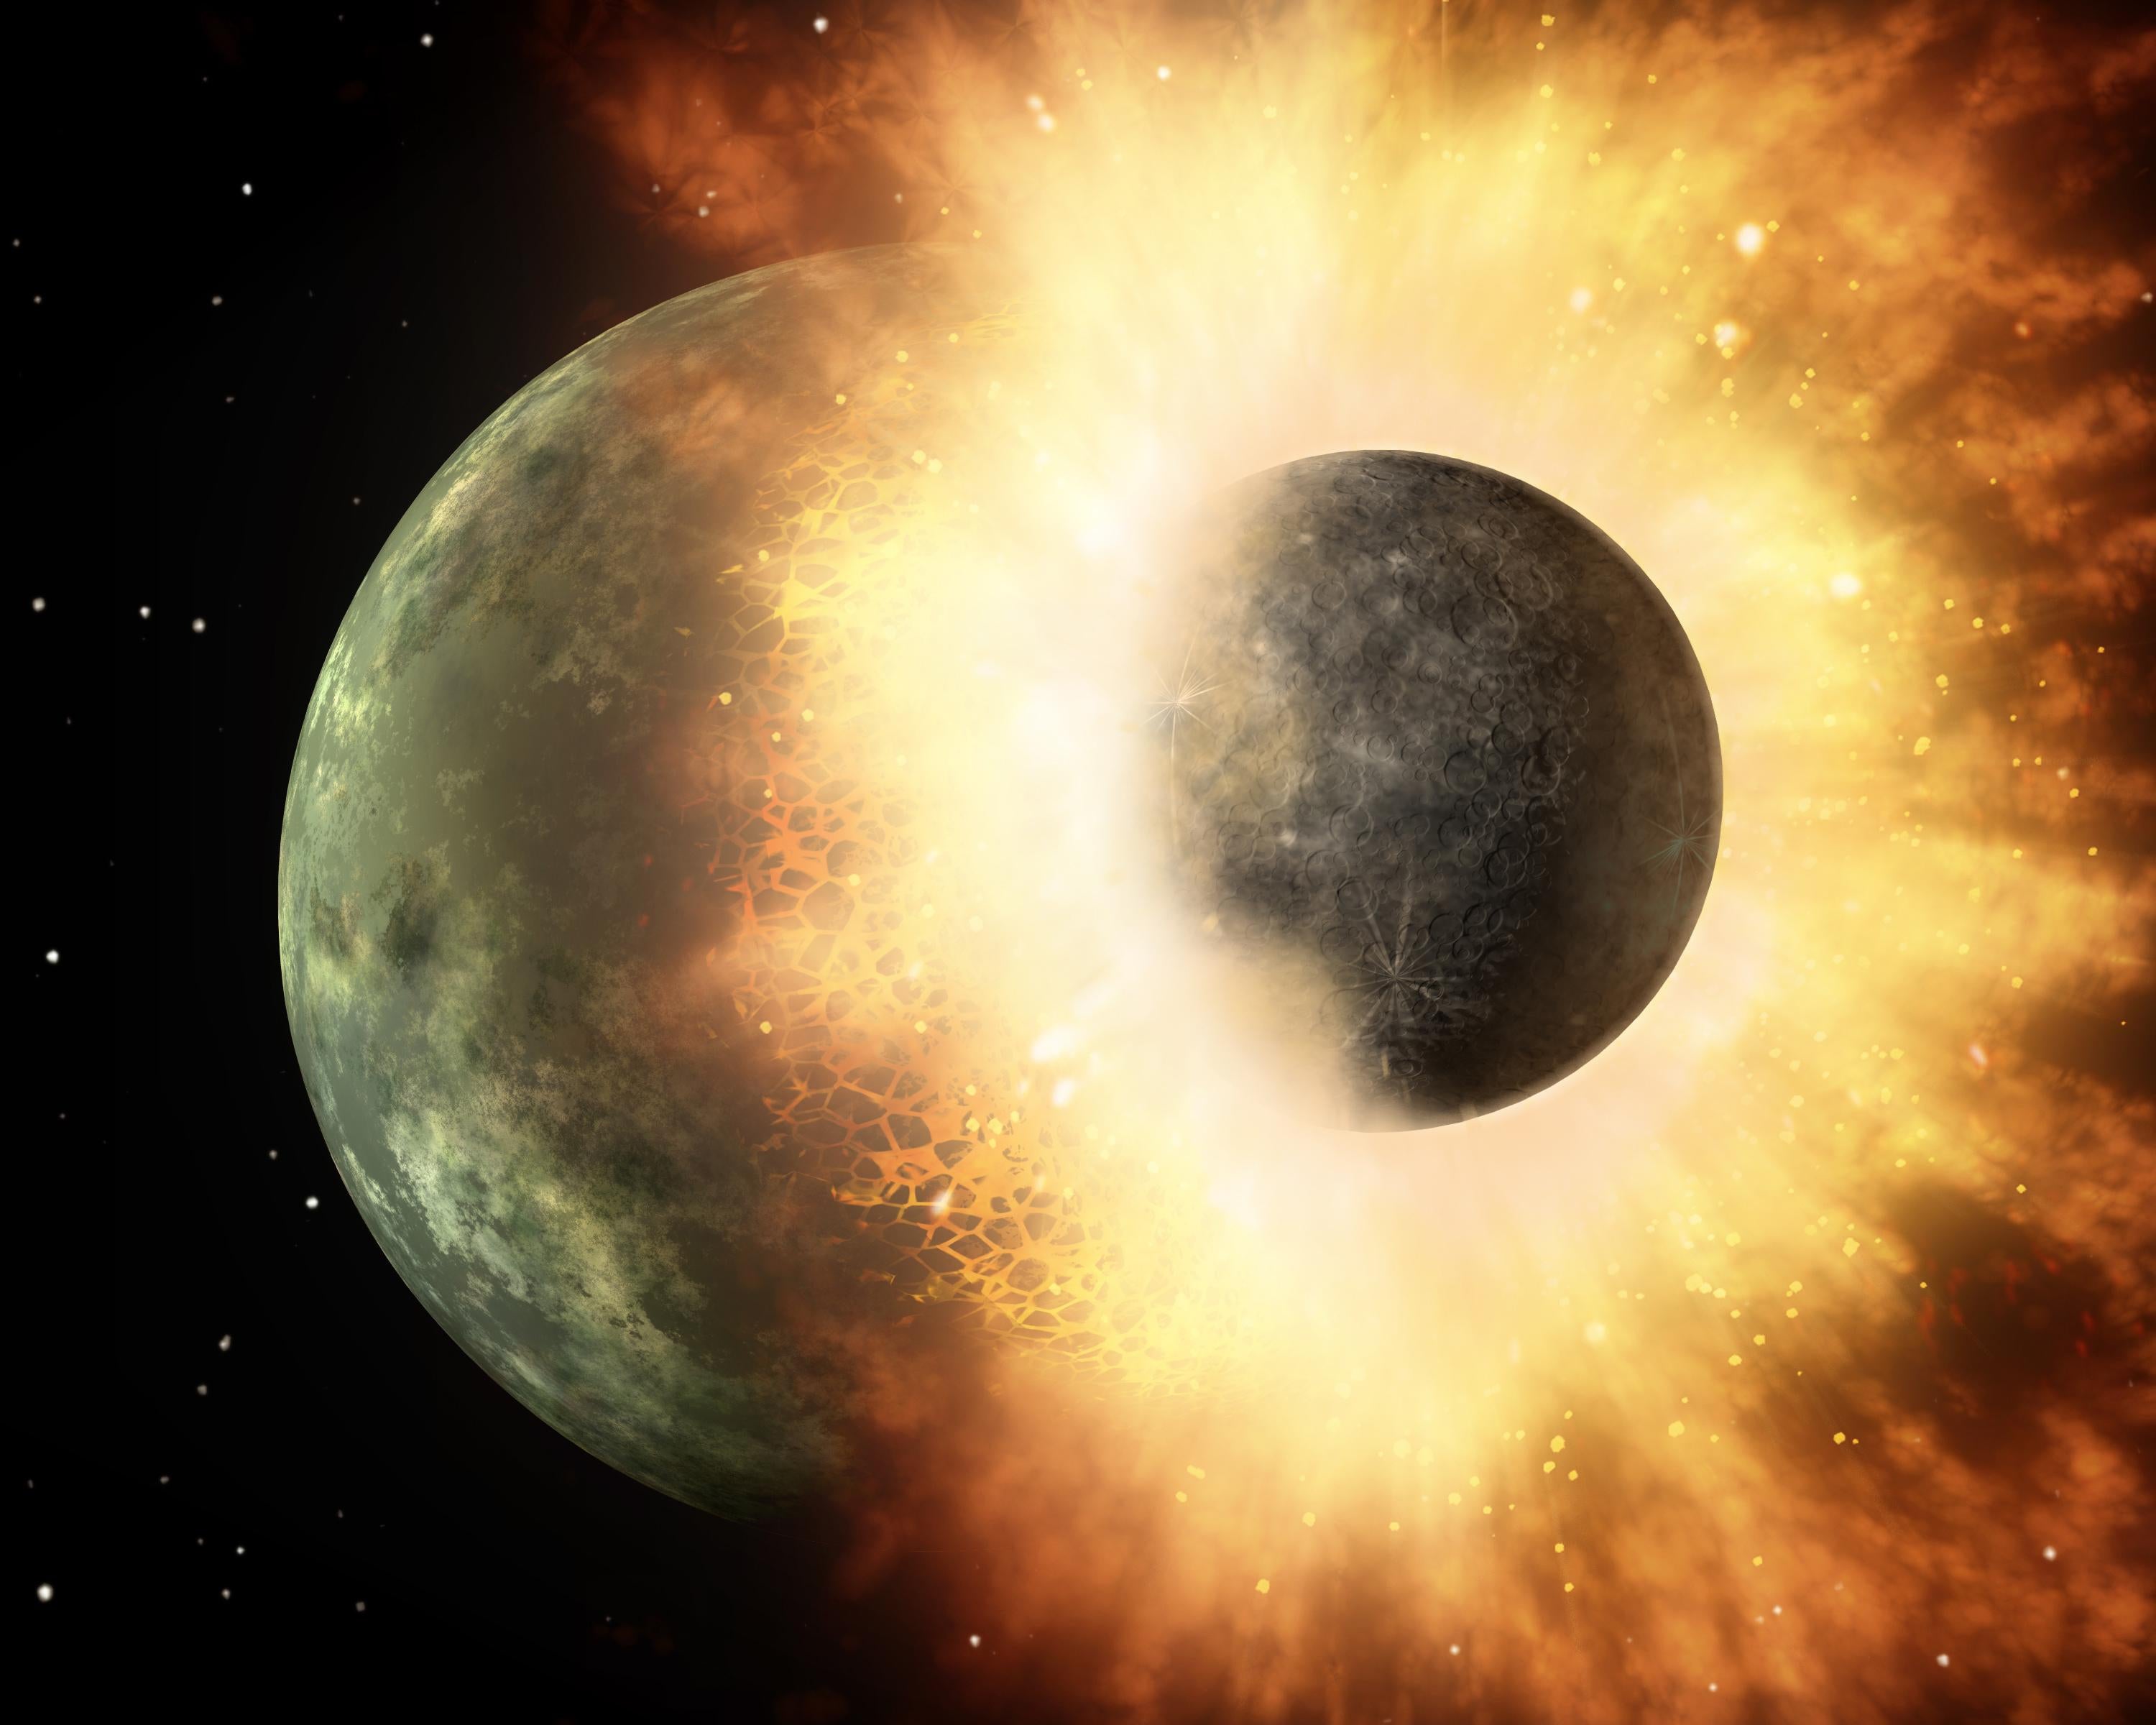 An artist’s conception of the massive impact with the primordial Earth that may have created the Moon